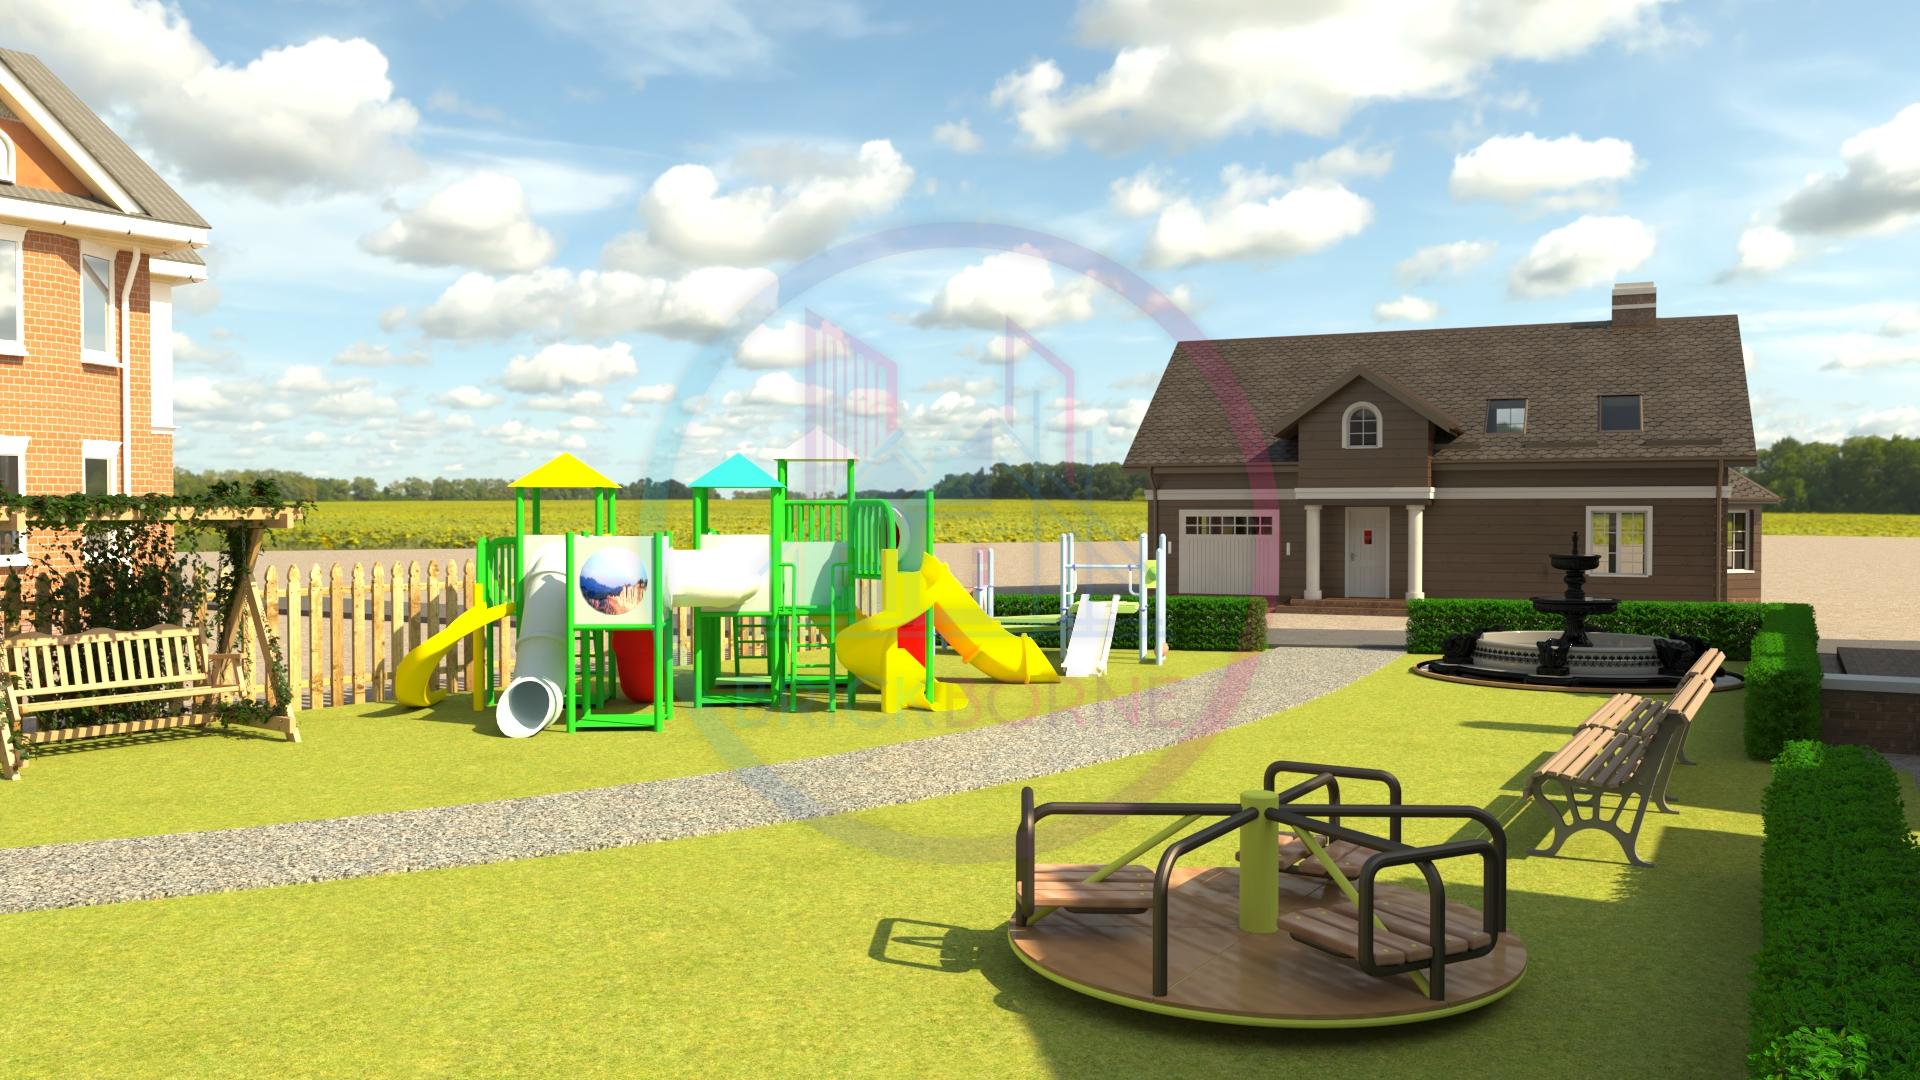 Renderings of Outdoor Playing Field in a Community